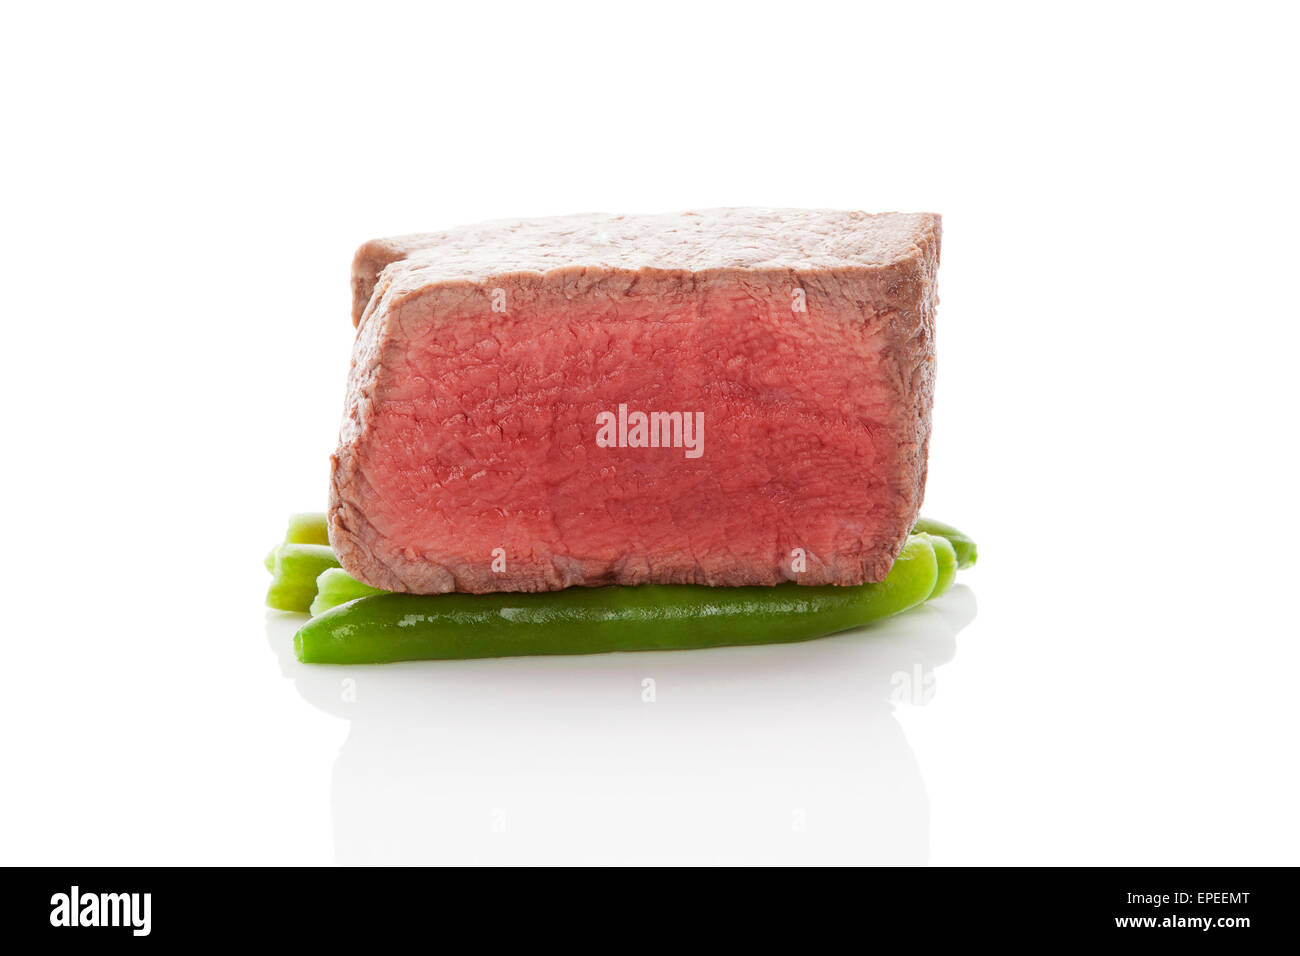 Beefsteak. Big sirloin steak on green beans isolated on white background. Culinary red meat steak eating. Stock Photo